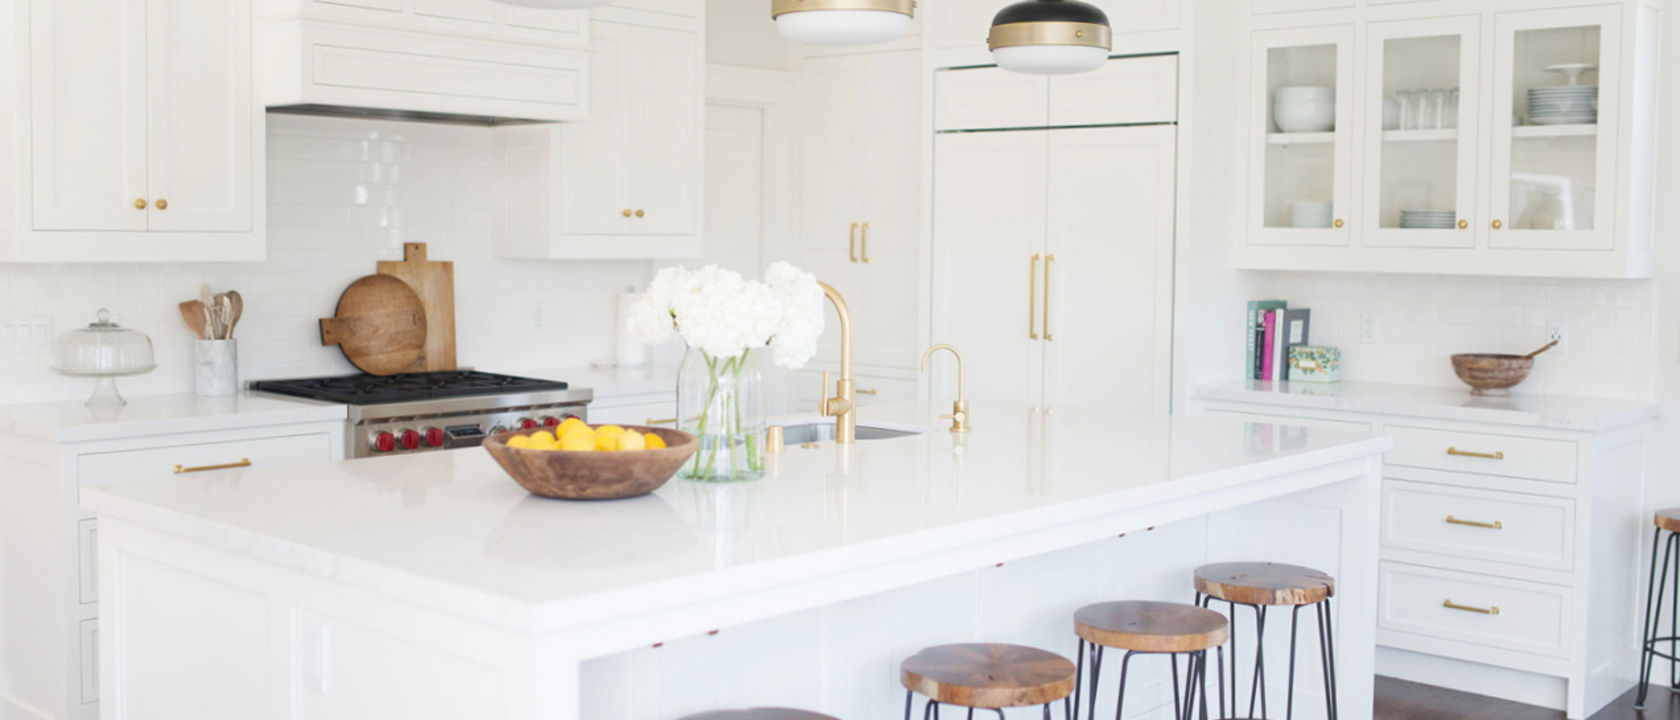 Bright white kitchen with gold accents featuring Torquay quartz countertops